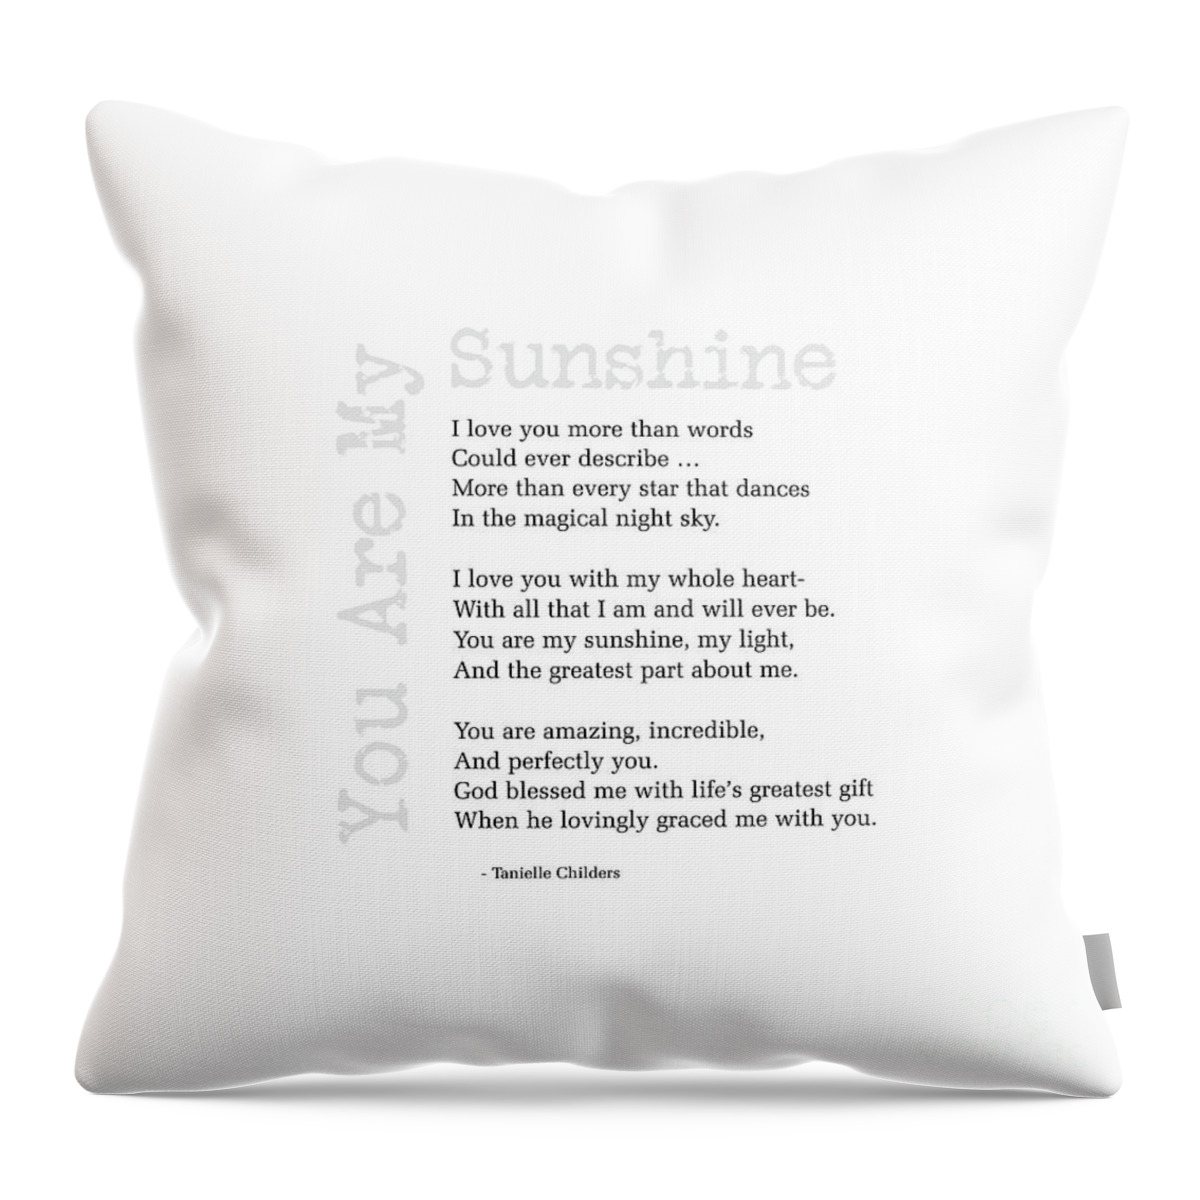 Sunshine Throw Pillow featuring the digital art You Are My Sunshine by Tanielle Childers